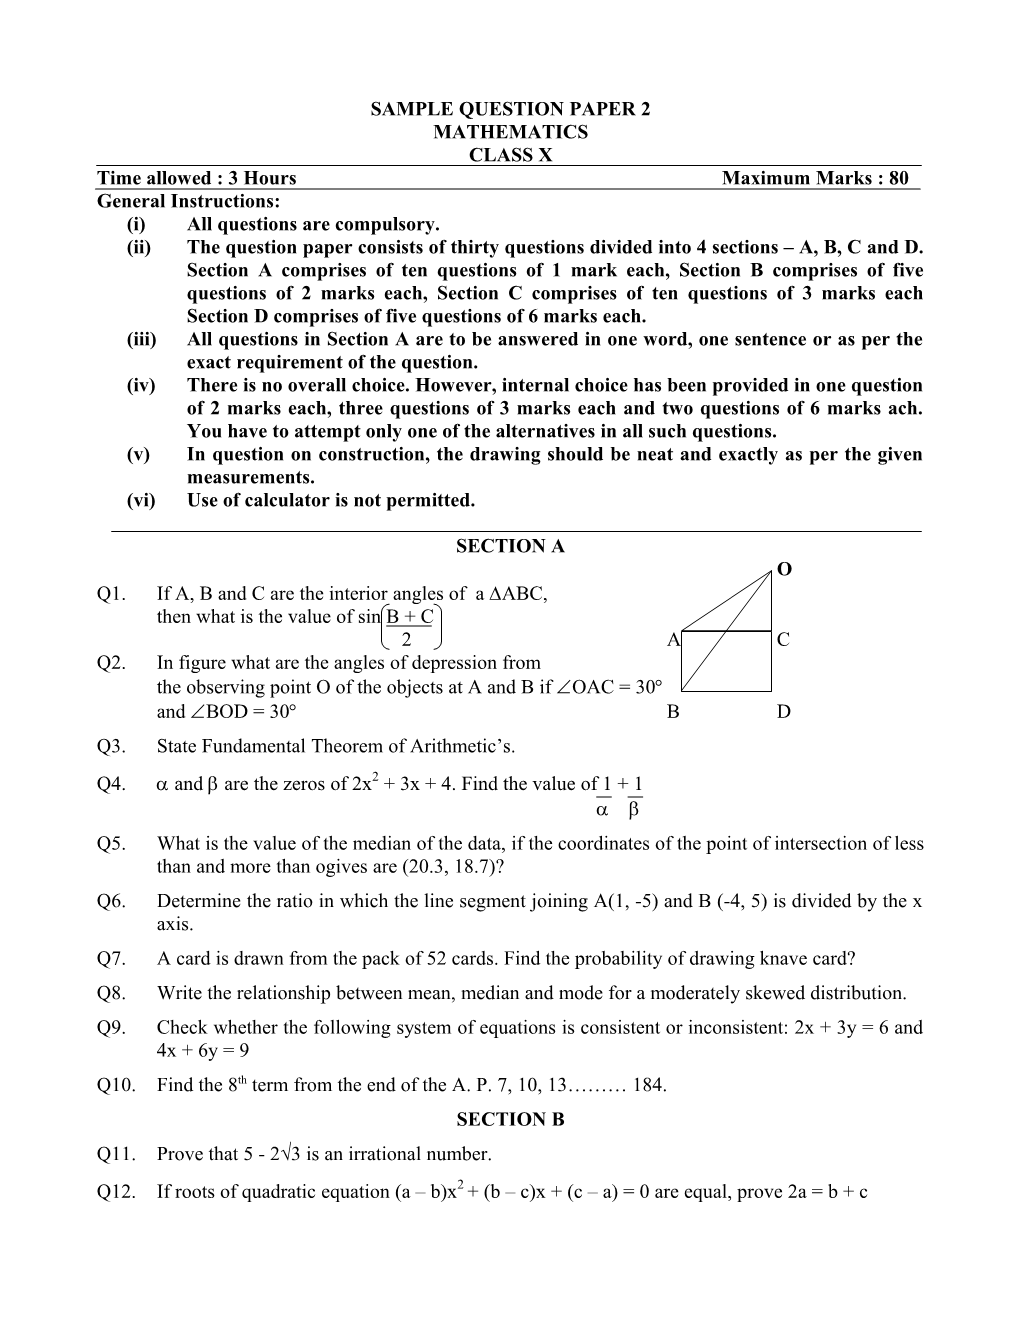 Sample Question Paper 2